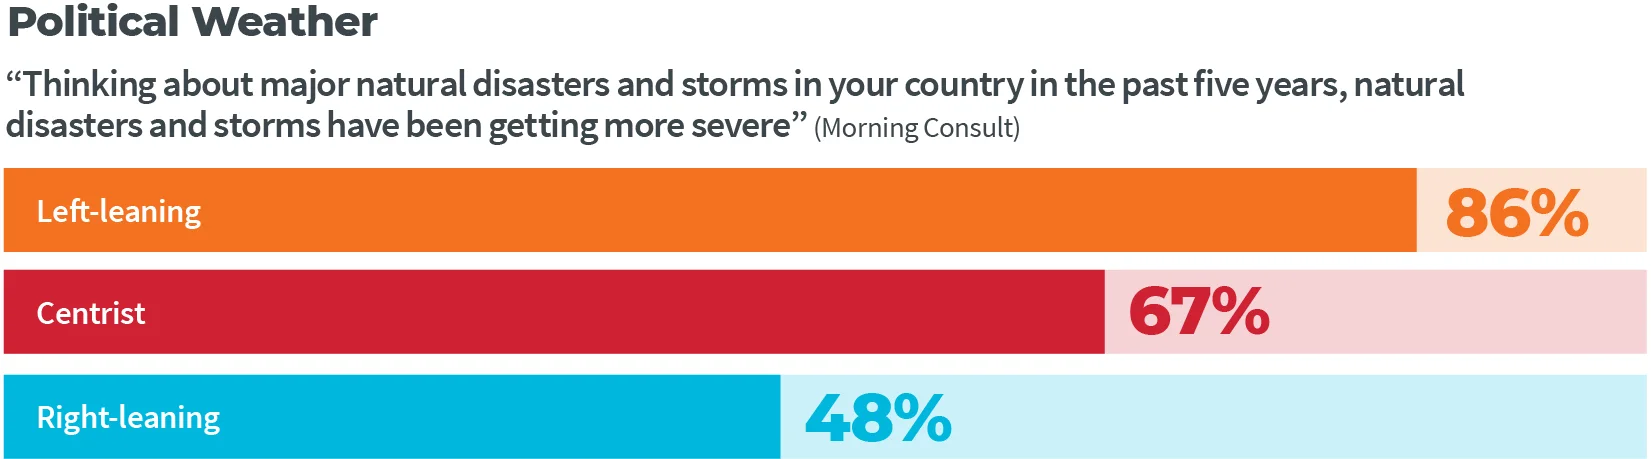 Political weather survey (Morning Consult/ Climate Access/ Climate Narratives Initiative)